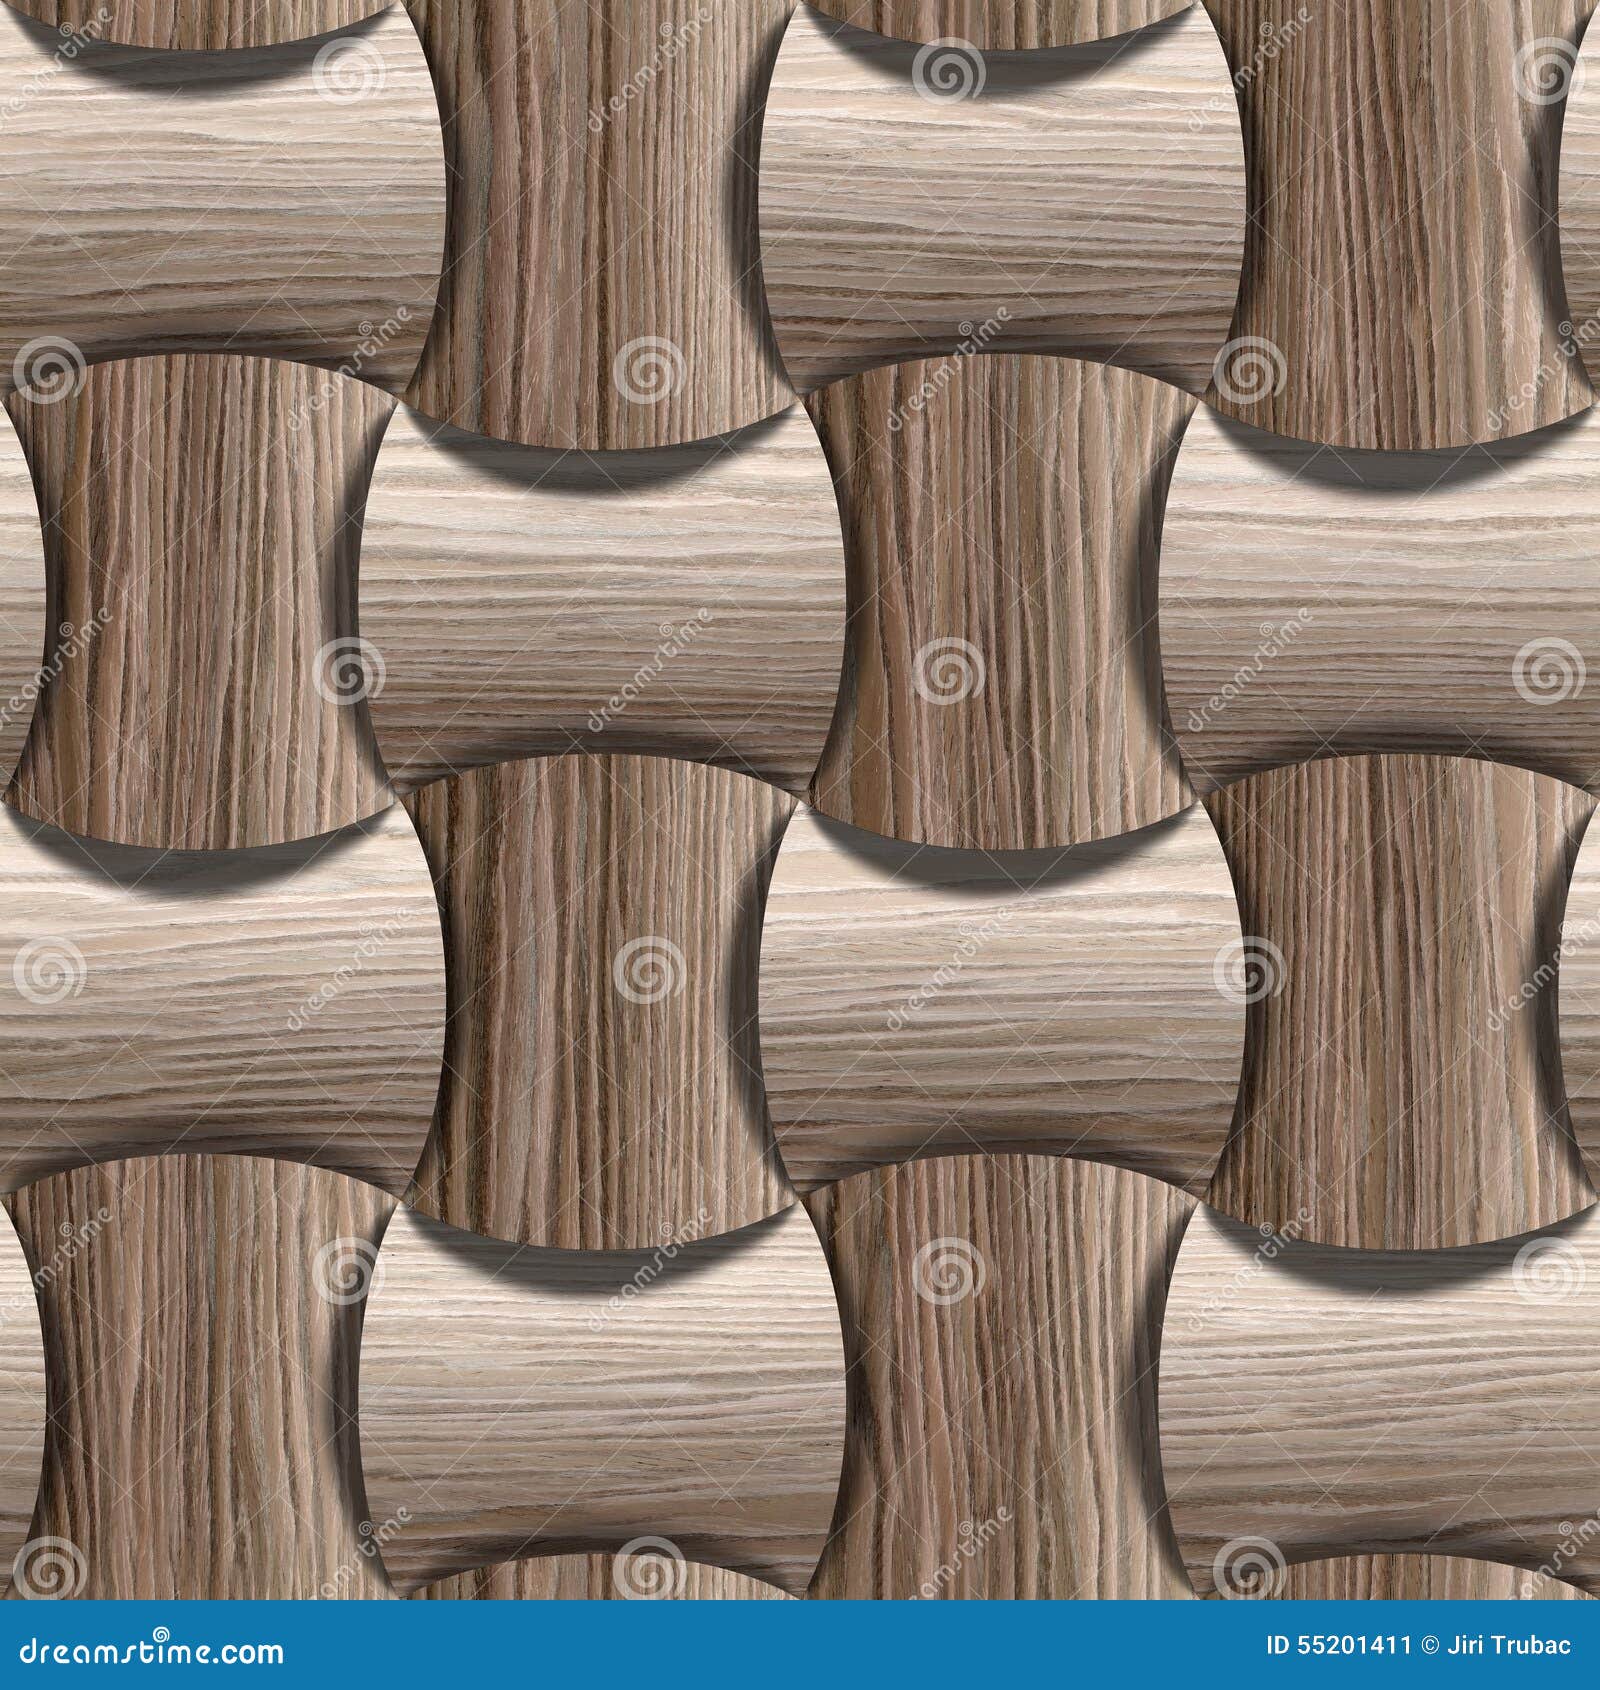 abstract paneling pattern - seamless background - blasted oak